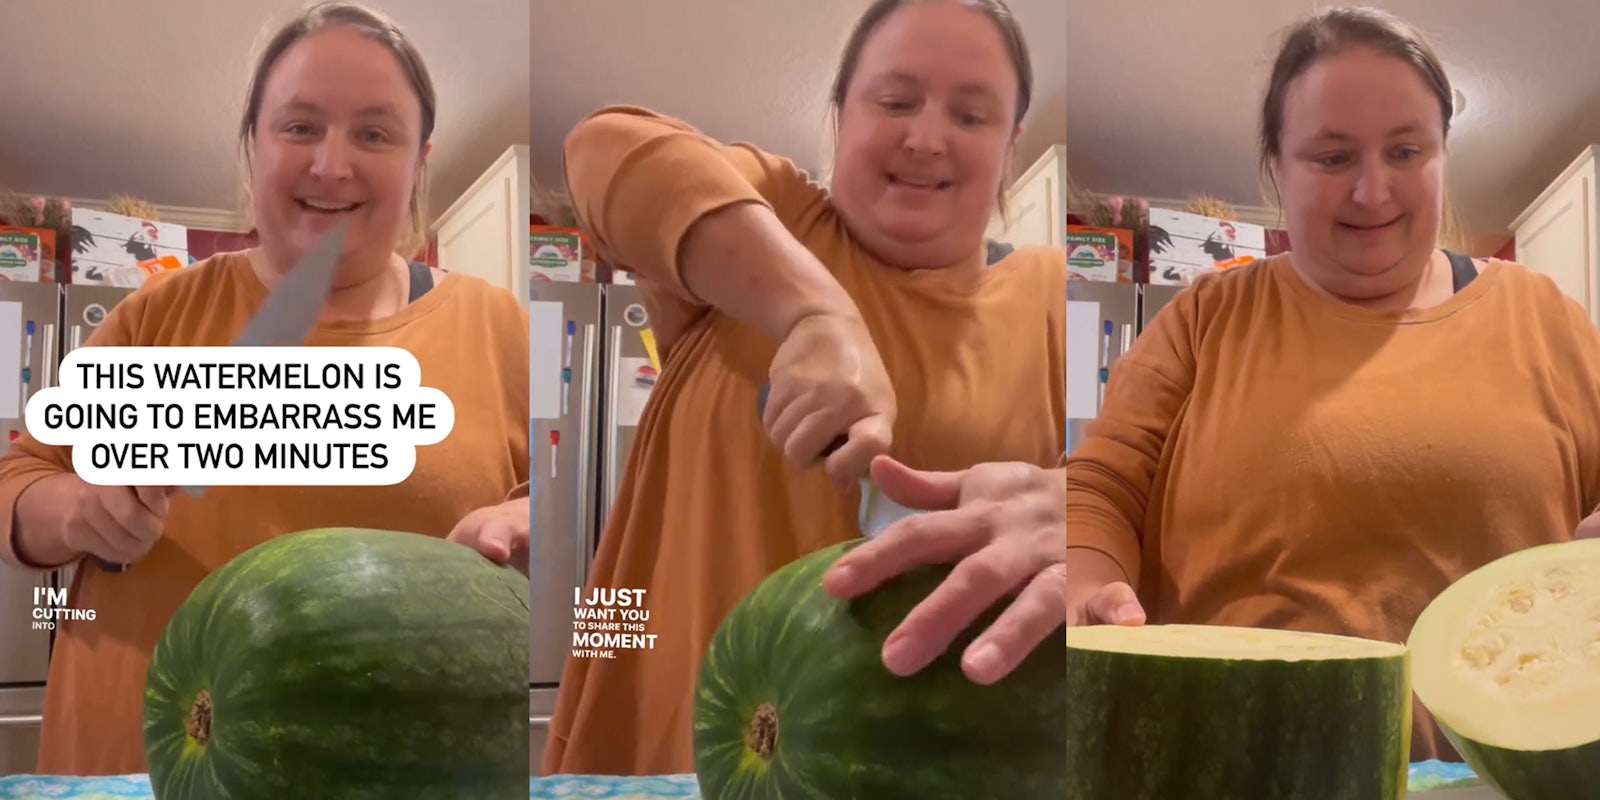 woman with 'watermelon' with caption 'THIS WATERMELON IS GOING TO EMBARRASS ME OVER TWO MINUTES' (l) woman with 'watermelon' with caption 'I just want you to share this moment with me' (c) woman with 'watermelon' (r)